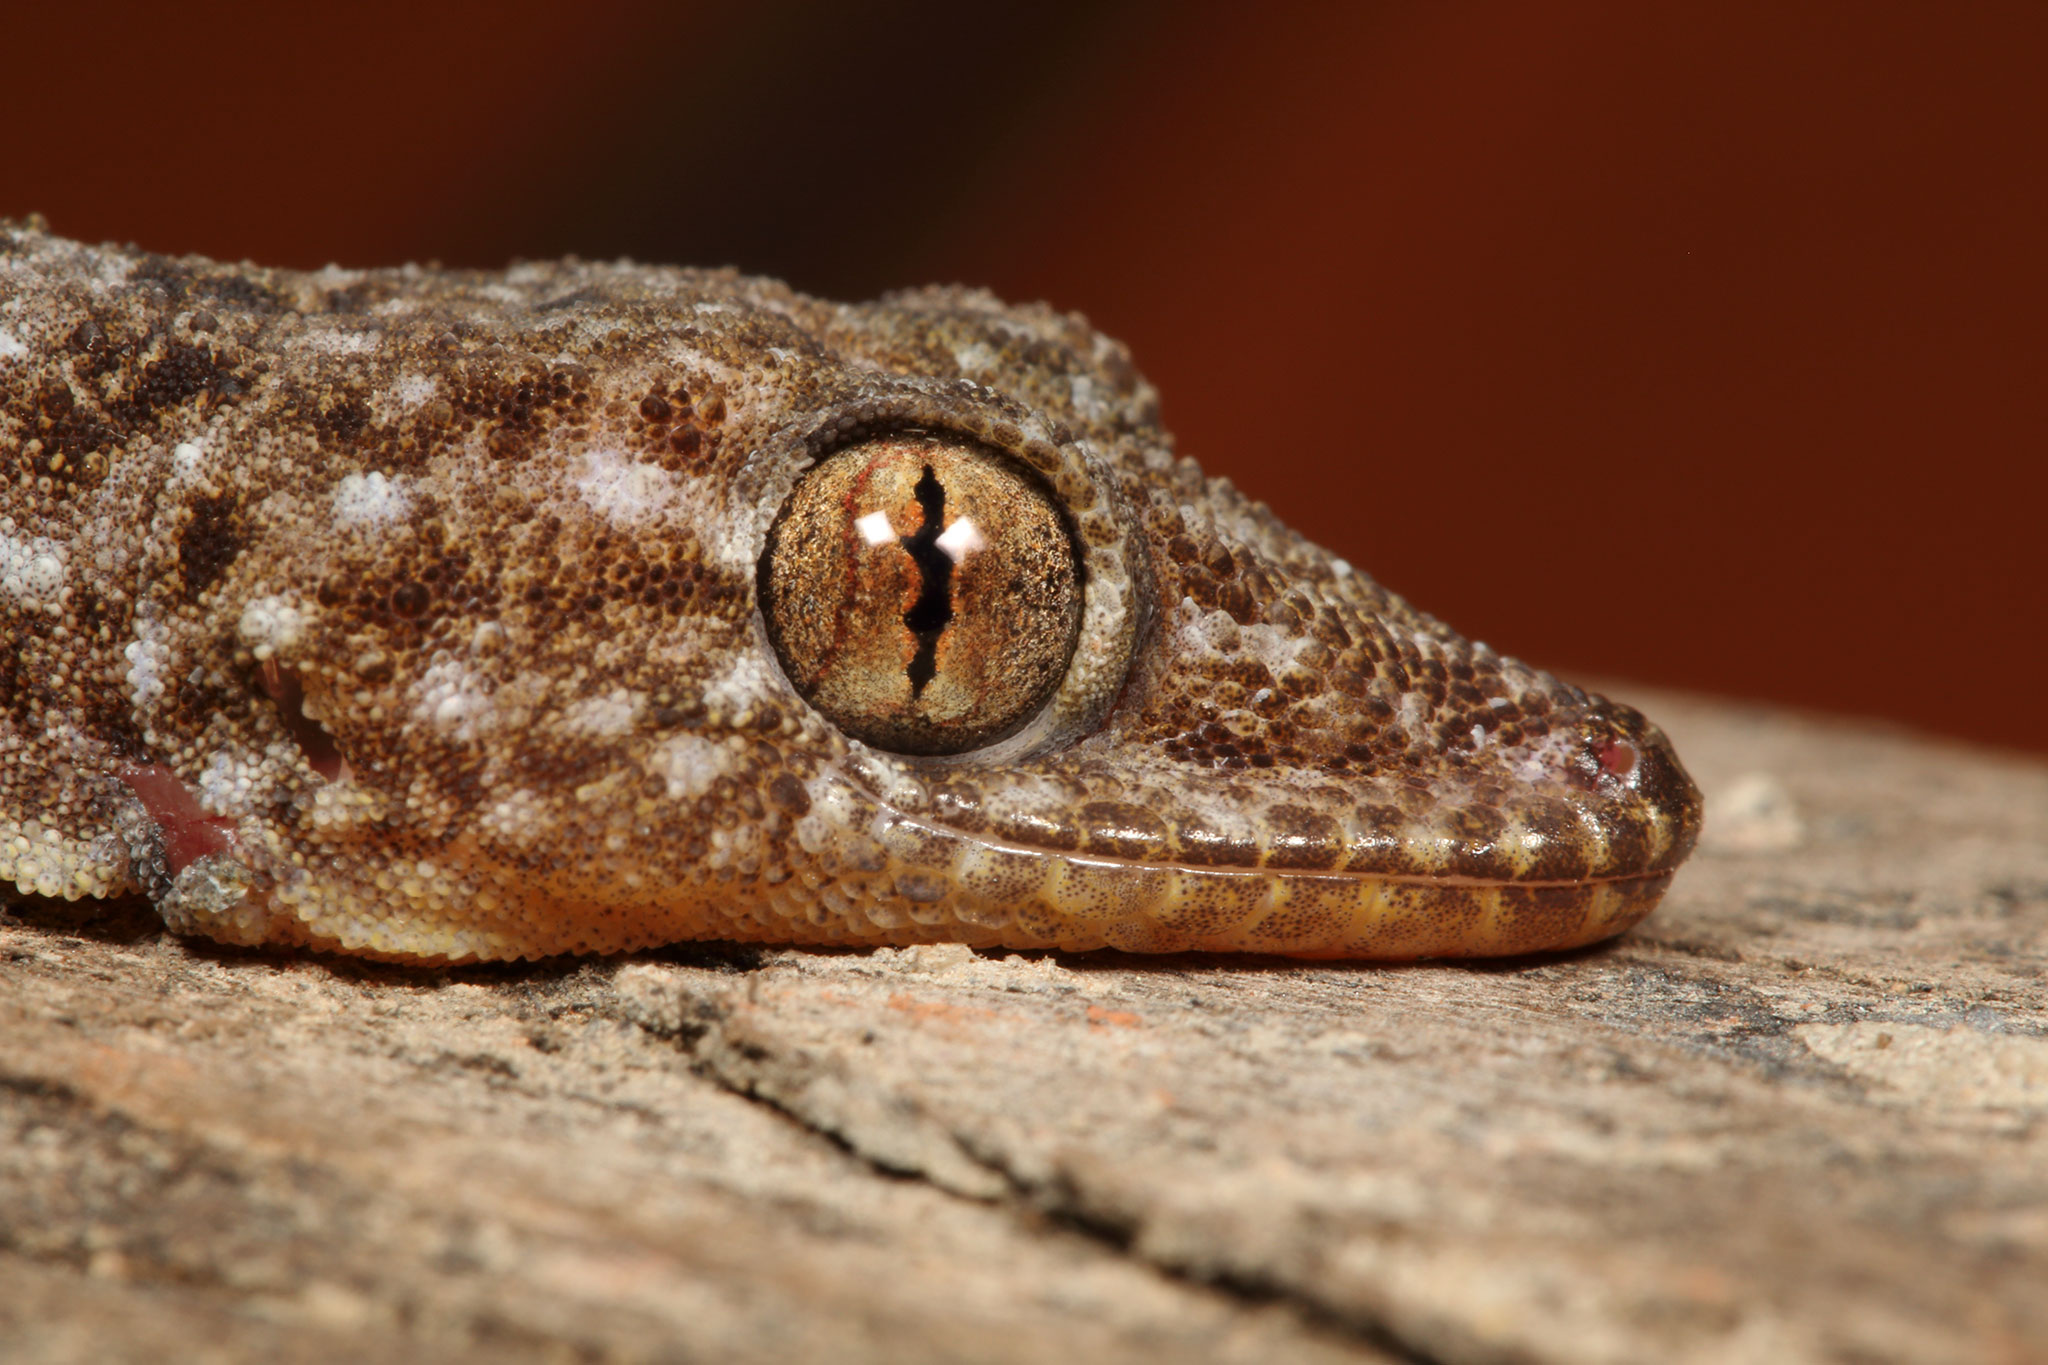 New Spotted Gecko Found in Tiger Reserve